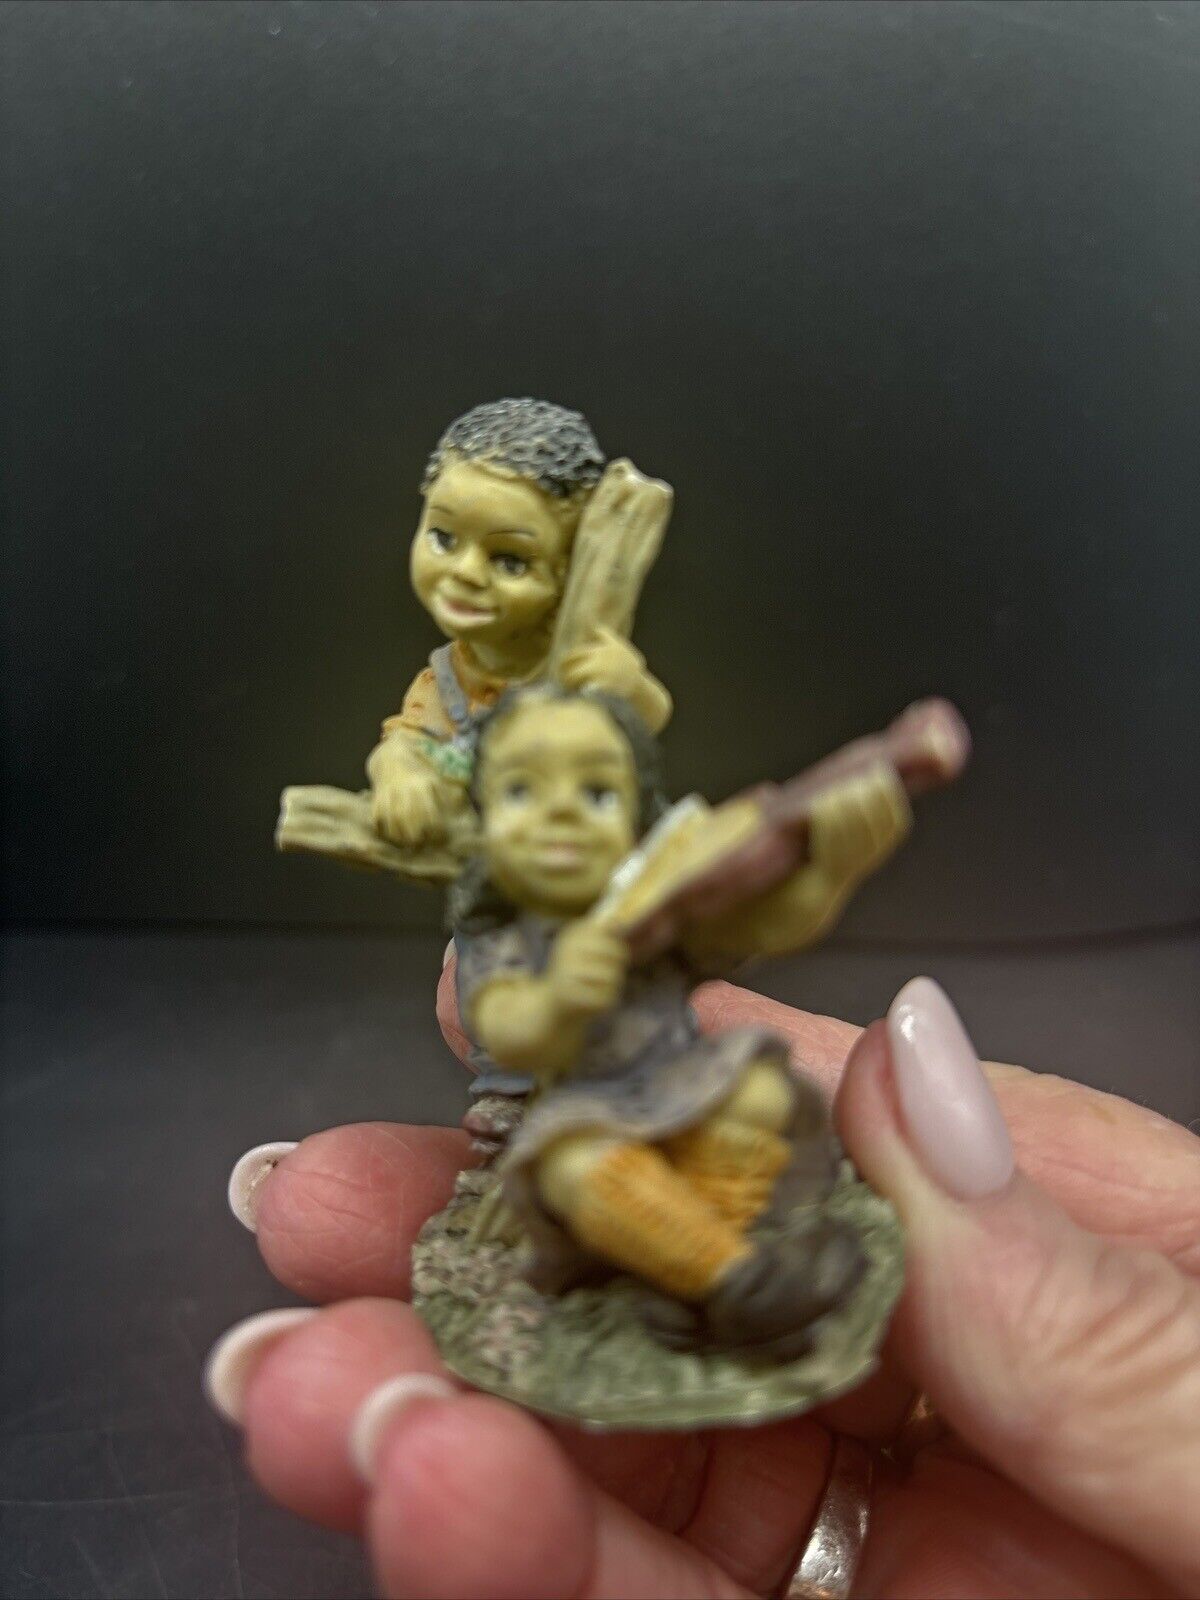 Adorable Black Children Enjoying Time With The Violin Figurine 2.75”